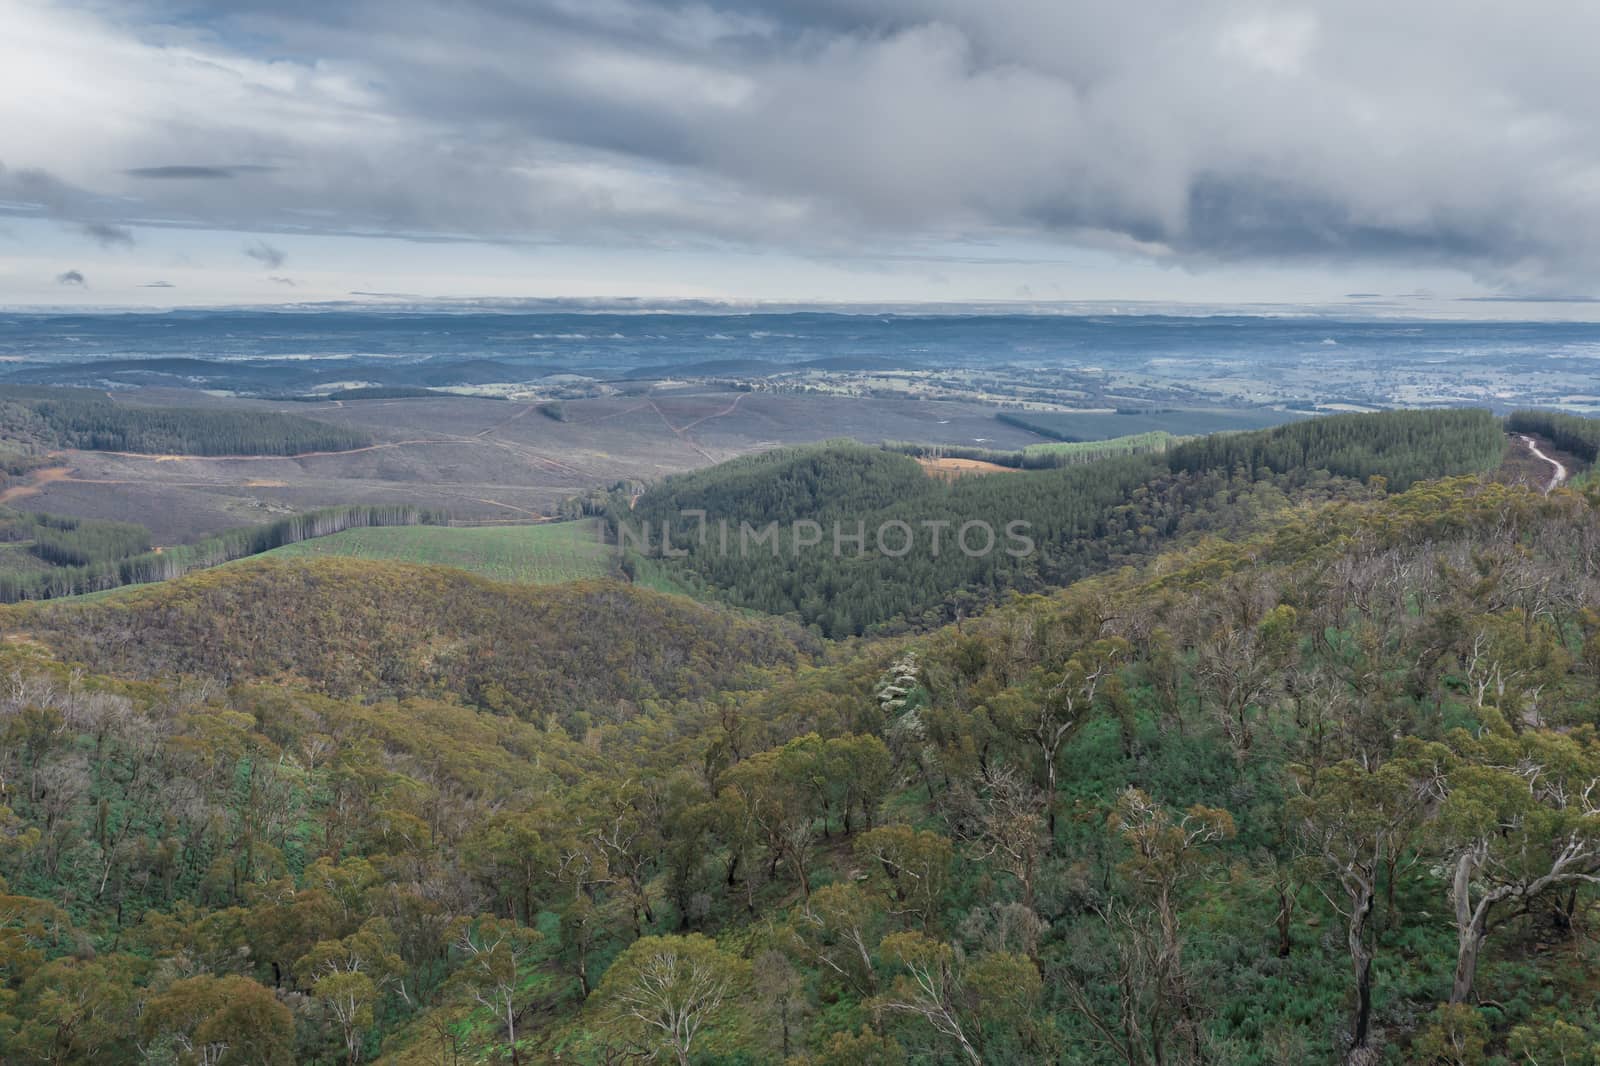 Aerial view from Mount Canobolas in the New South Wales regional town of Orange in Australia